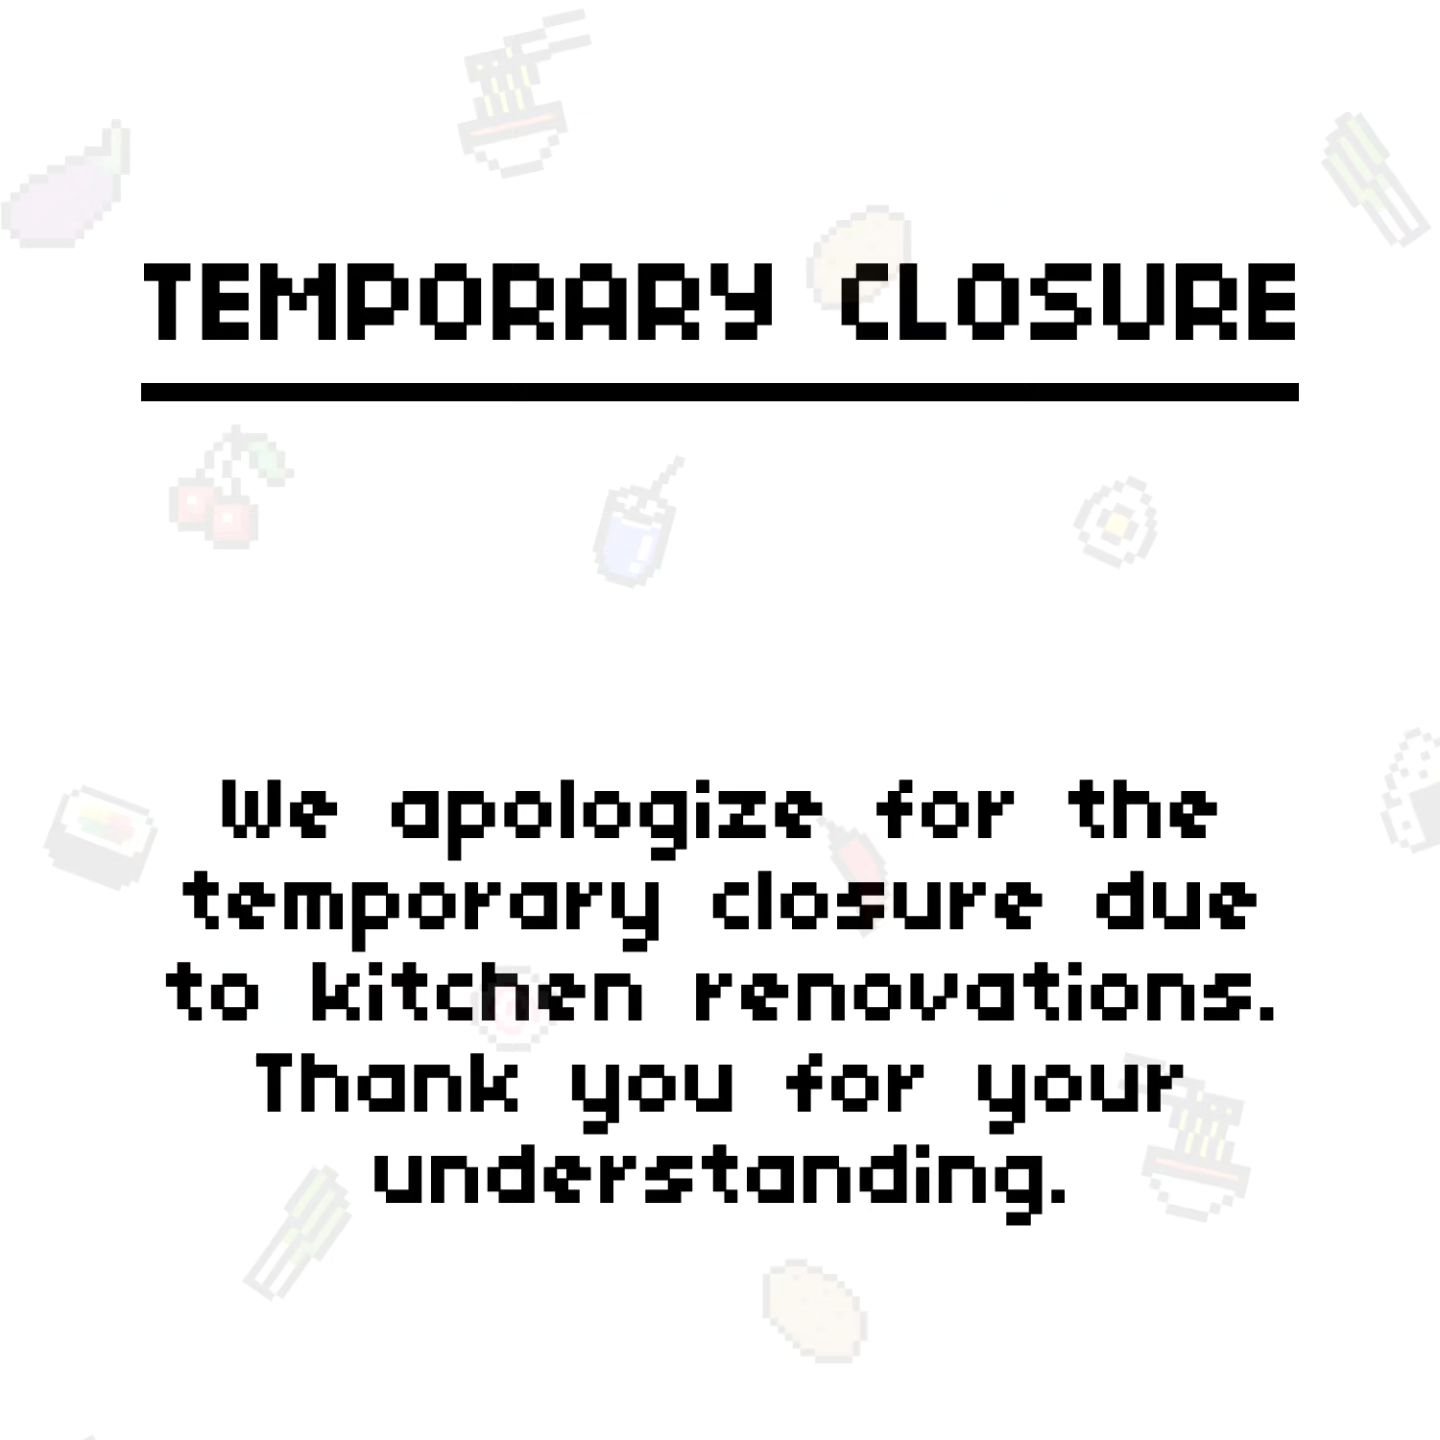 &quot;We regret to inform you that due to kitchen renovations, we will be temporarily closing our doors. We apologize for any inconvenience this may cause and appreciate your understanding during this time. We look forward to welcoming you back soon 